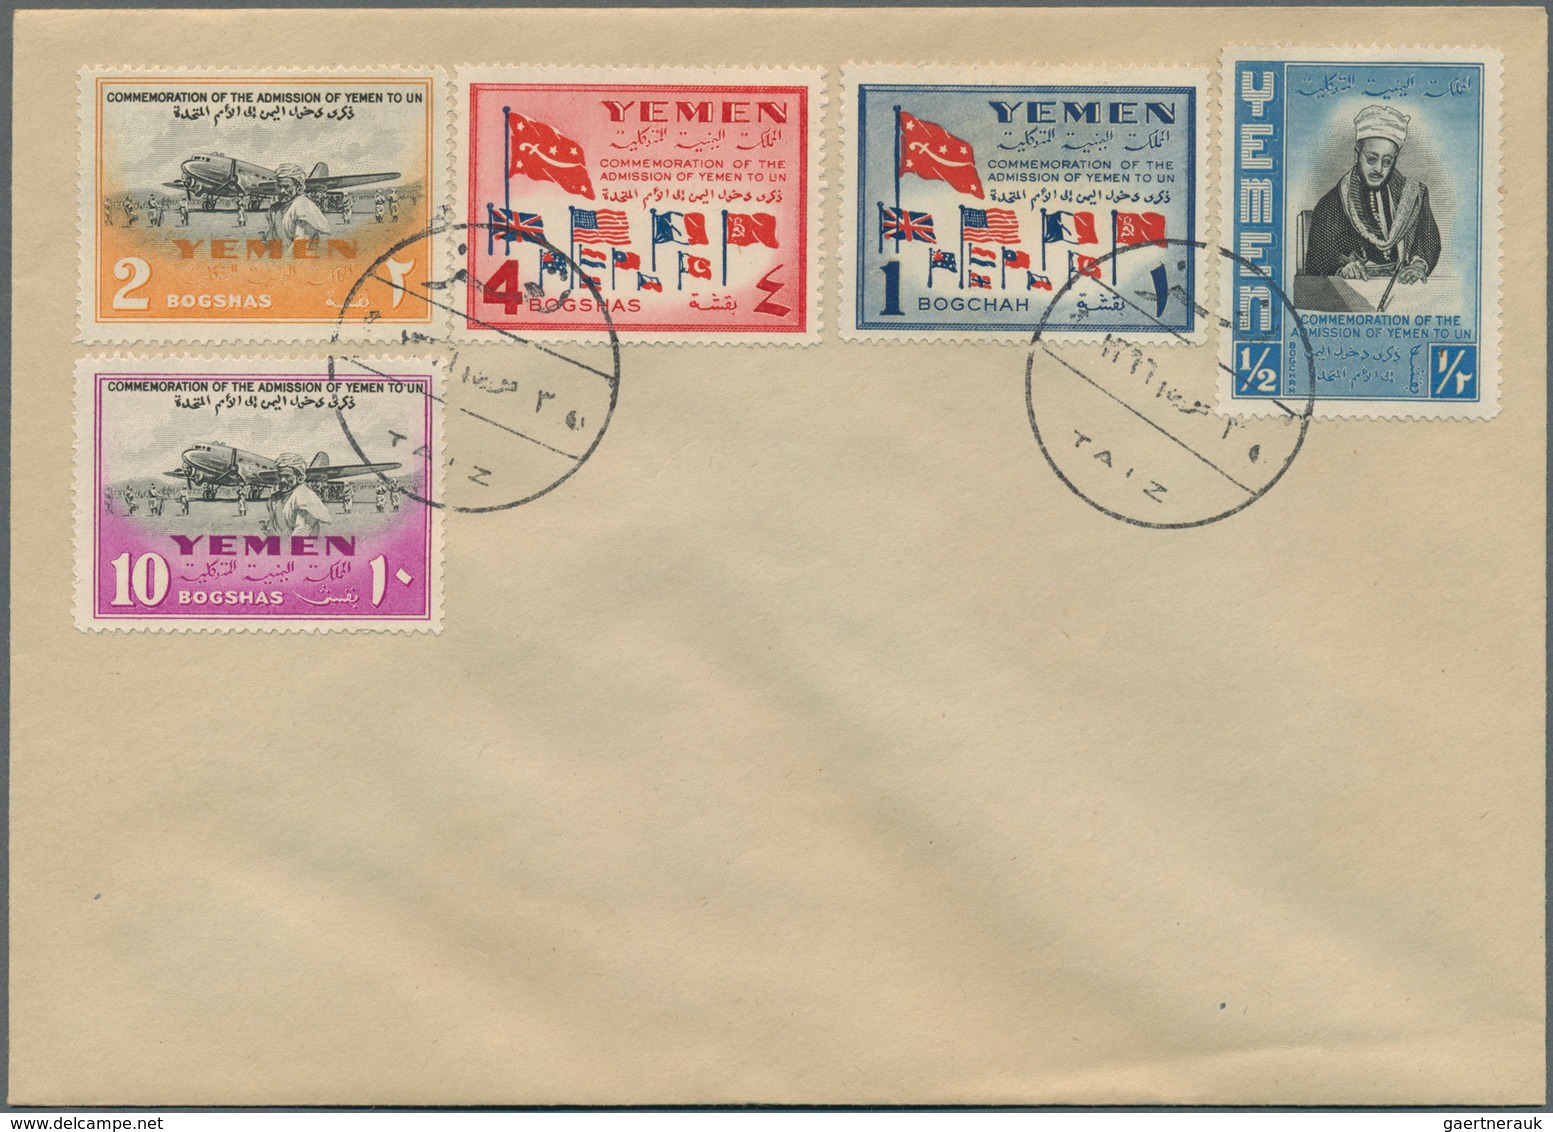 24662 Asien: 1958/1972, ARAB STATES, group of 14 covers (mainly unaddressed envelopes) comprising Yemen, R